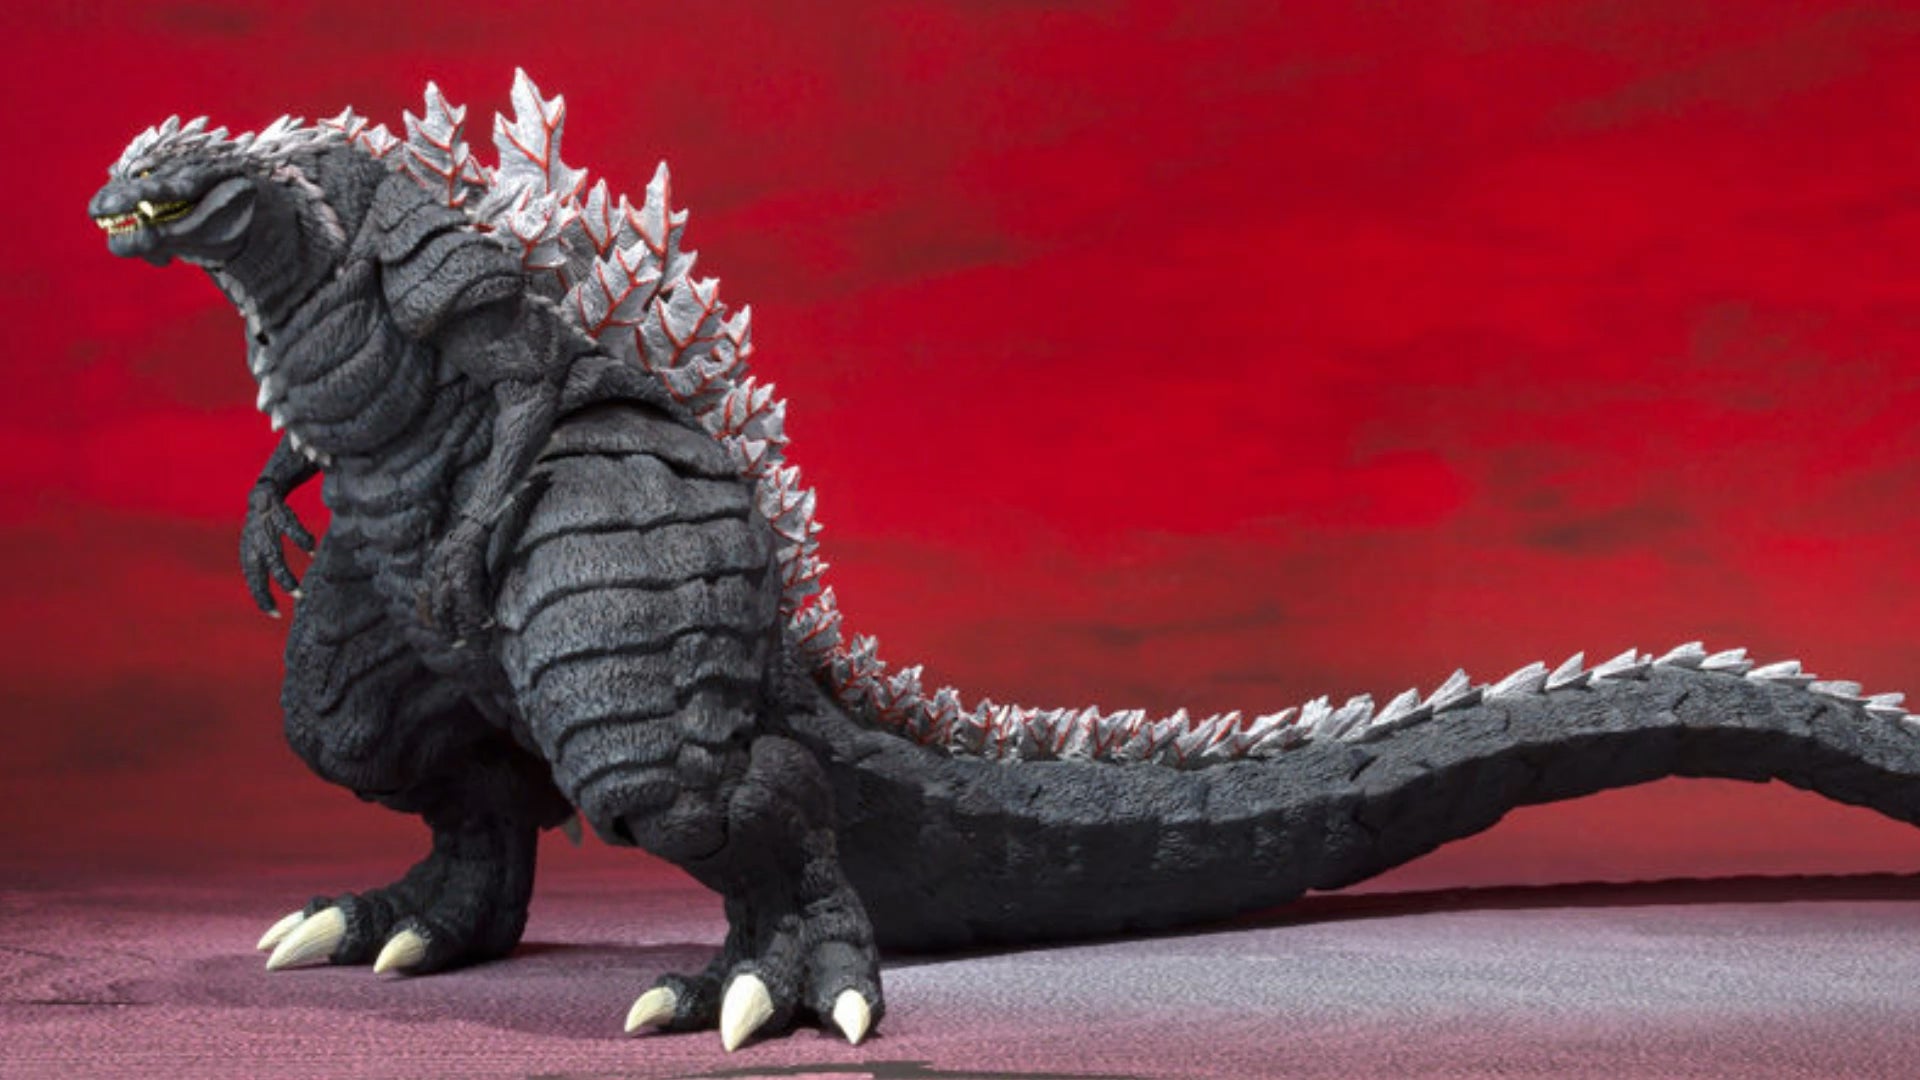 The Monsterarts Godzilla Ultima looks so good, I can't wait to get this guy on my shelf